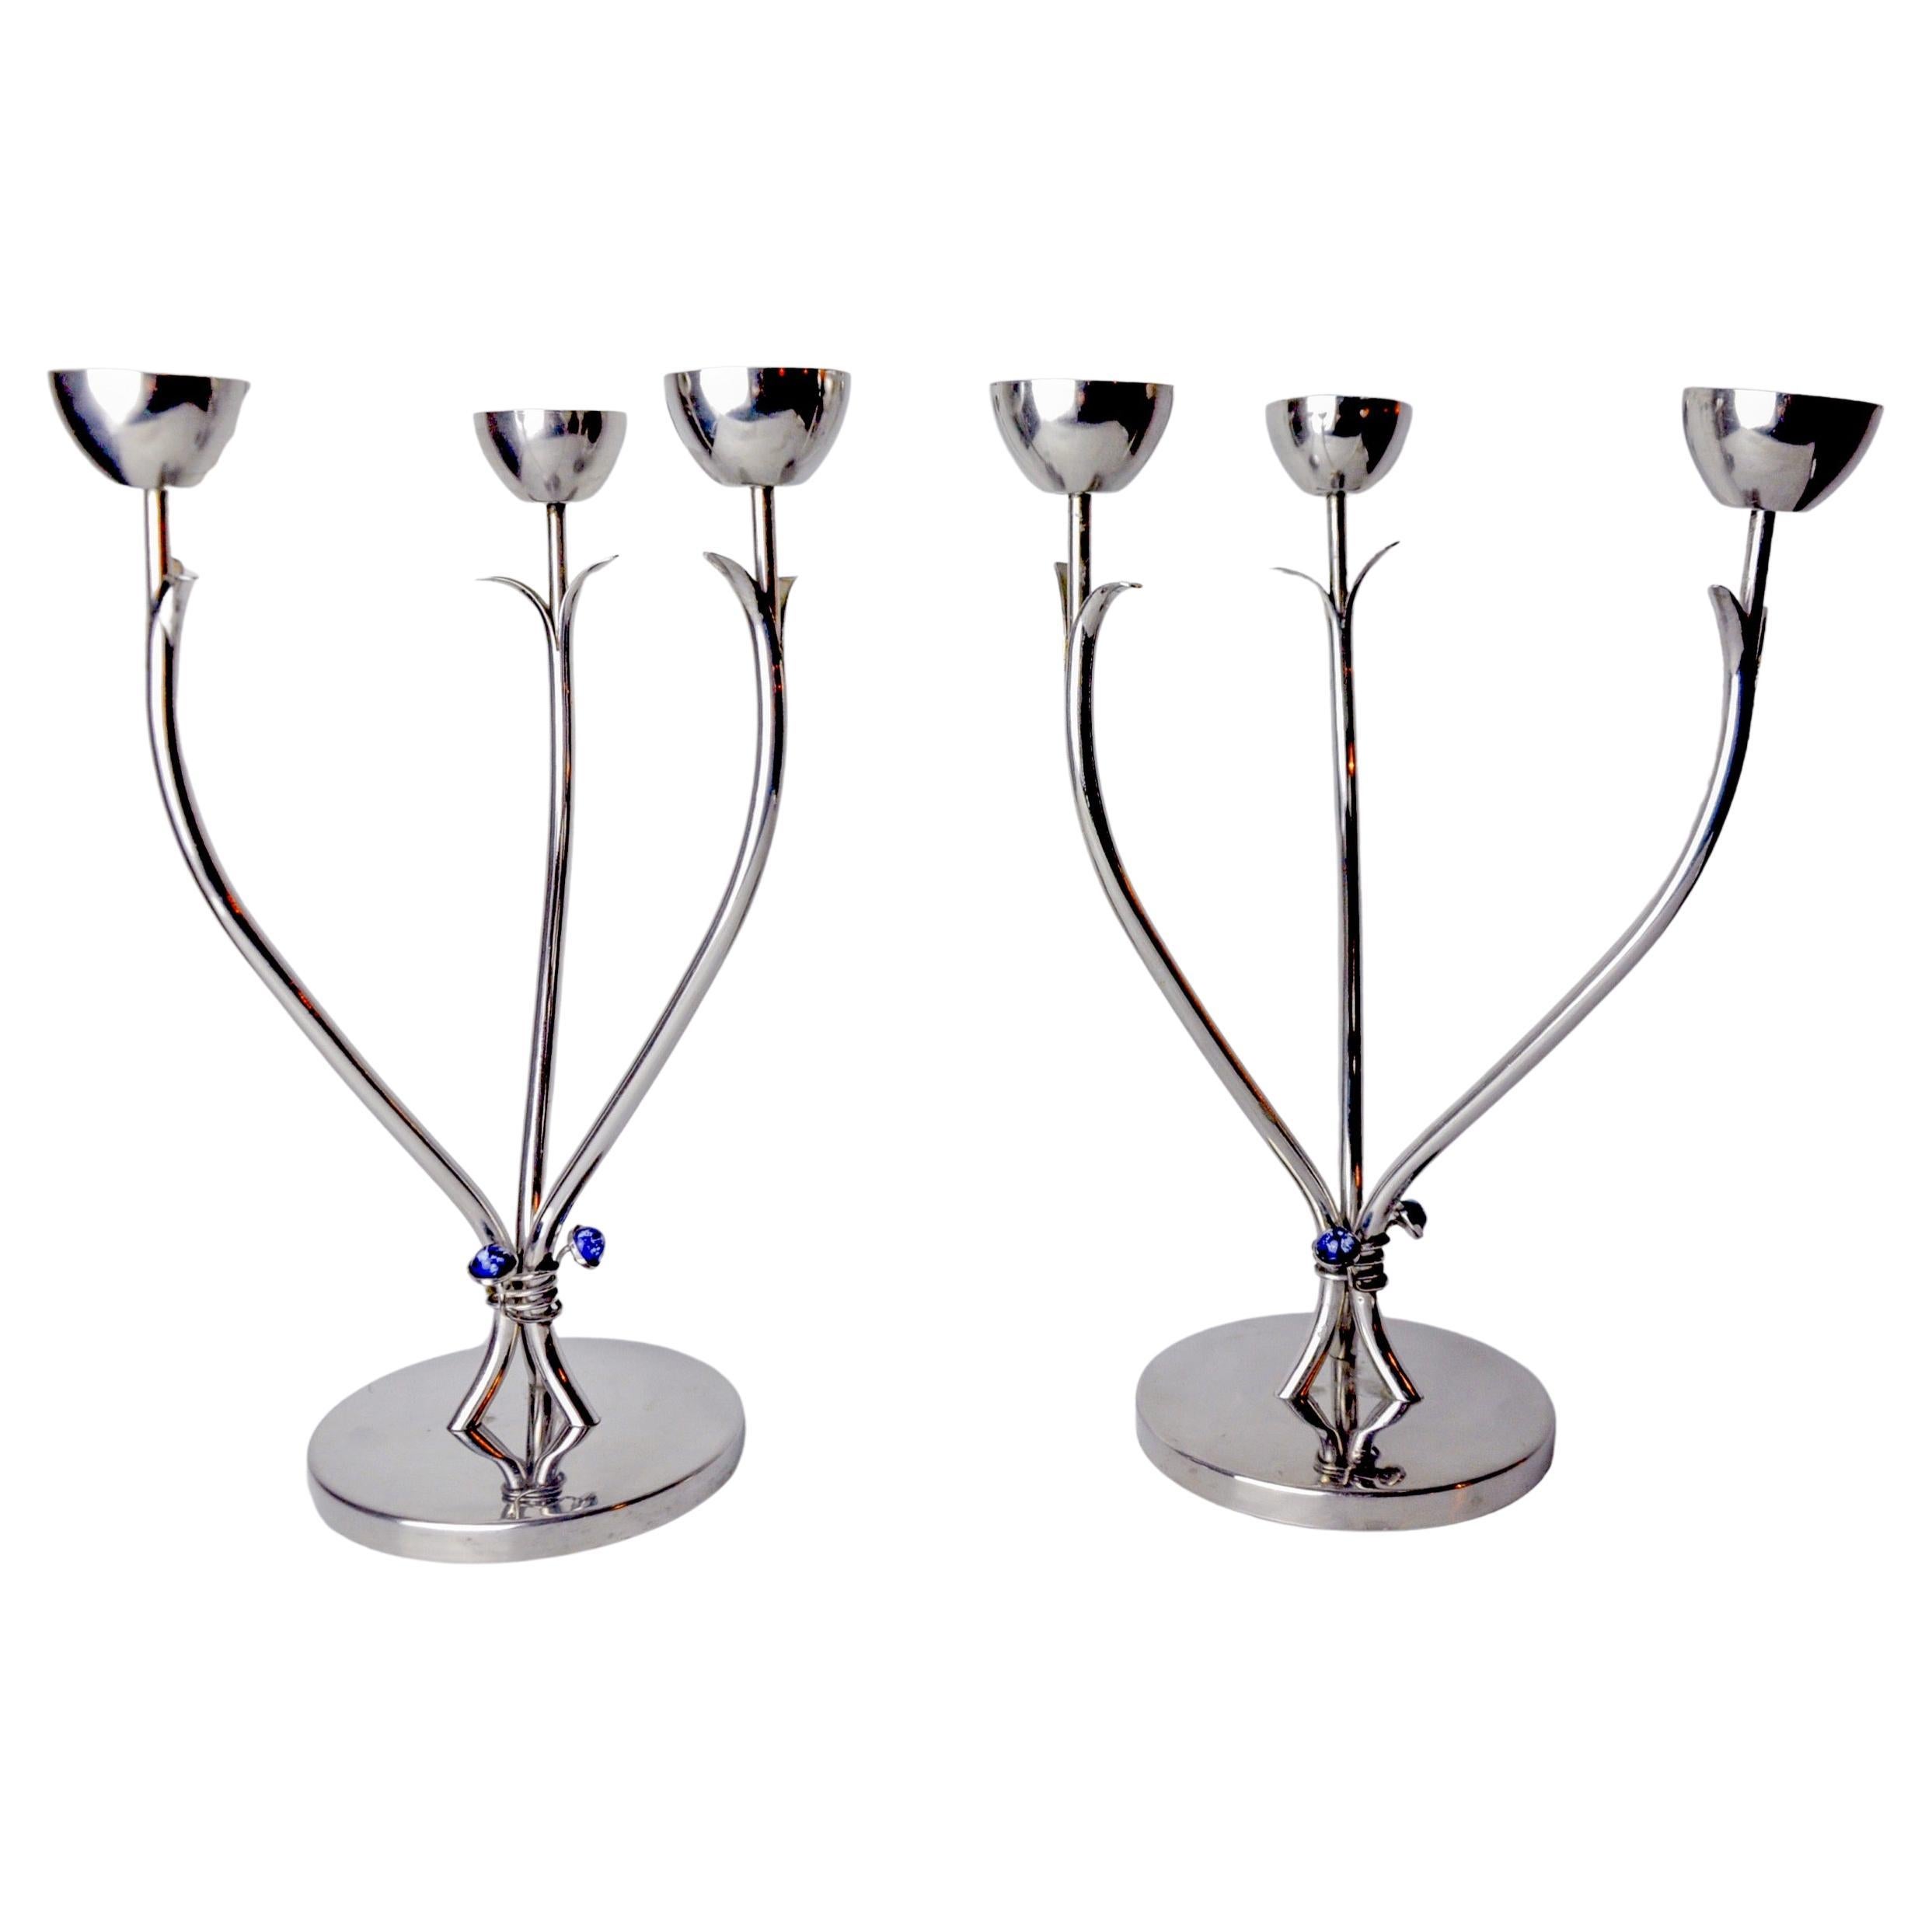 Pair of art deco stainless steel candlesticks with 3 flames and blue For Sale